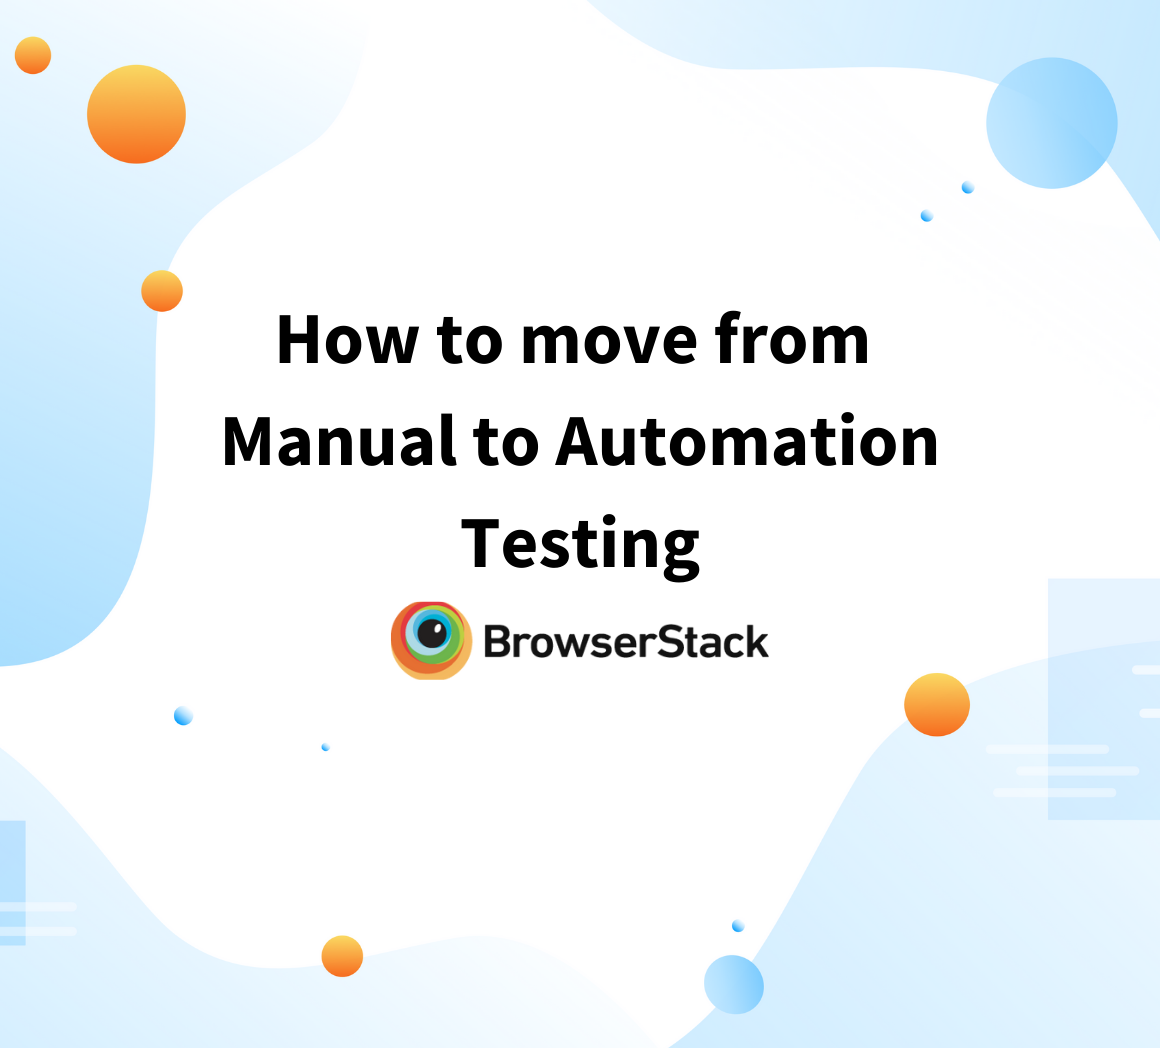 How to move from Manual to Automation Testing